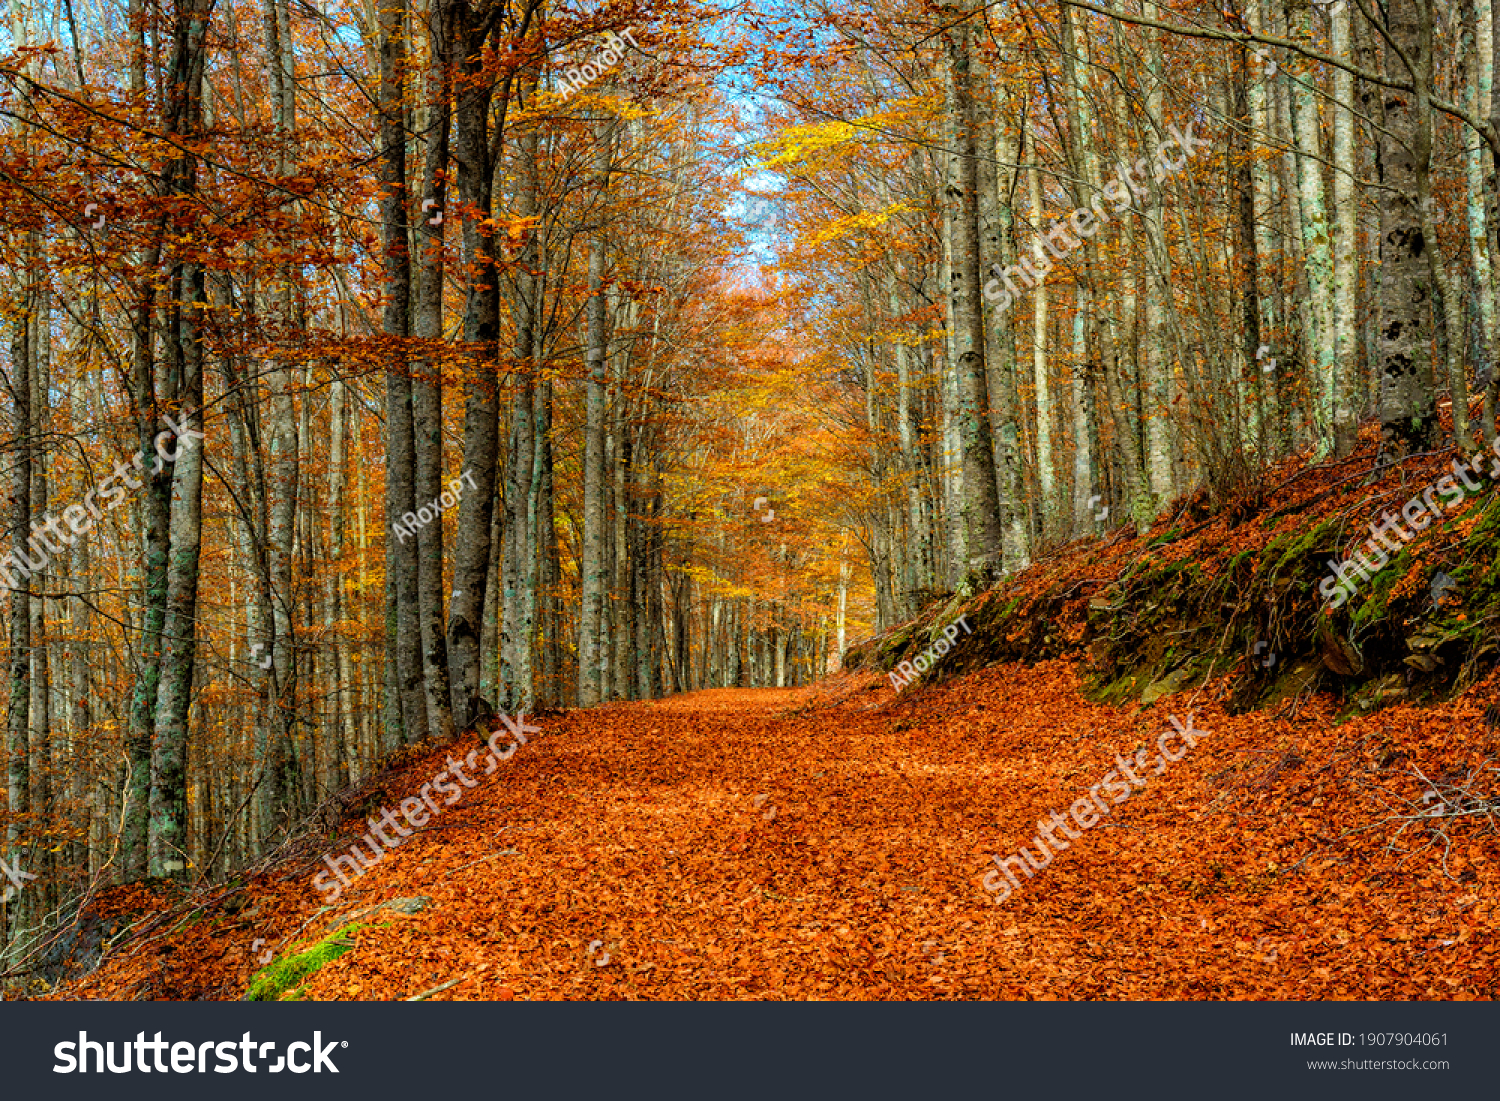 Autumn landscape beautiful colored trees over the forest, glowing in sunlight. Wonderful picturesque background. Beautiful colors and a peaceful atmosphere around. Gorgeous view. #1907904061